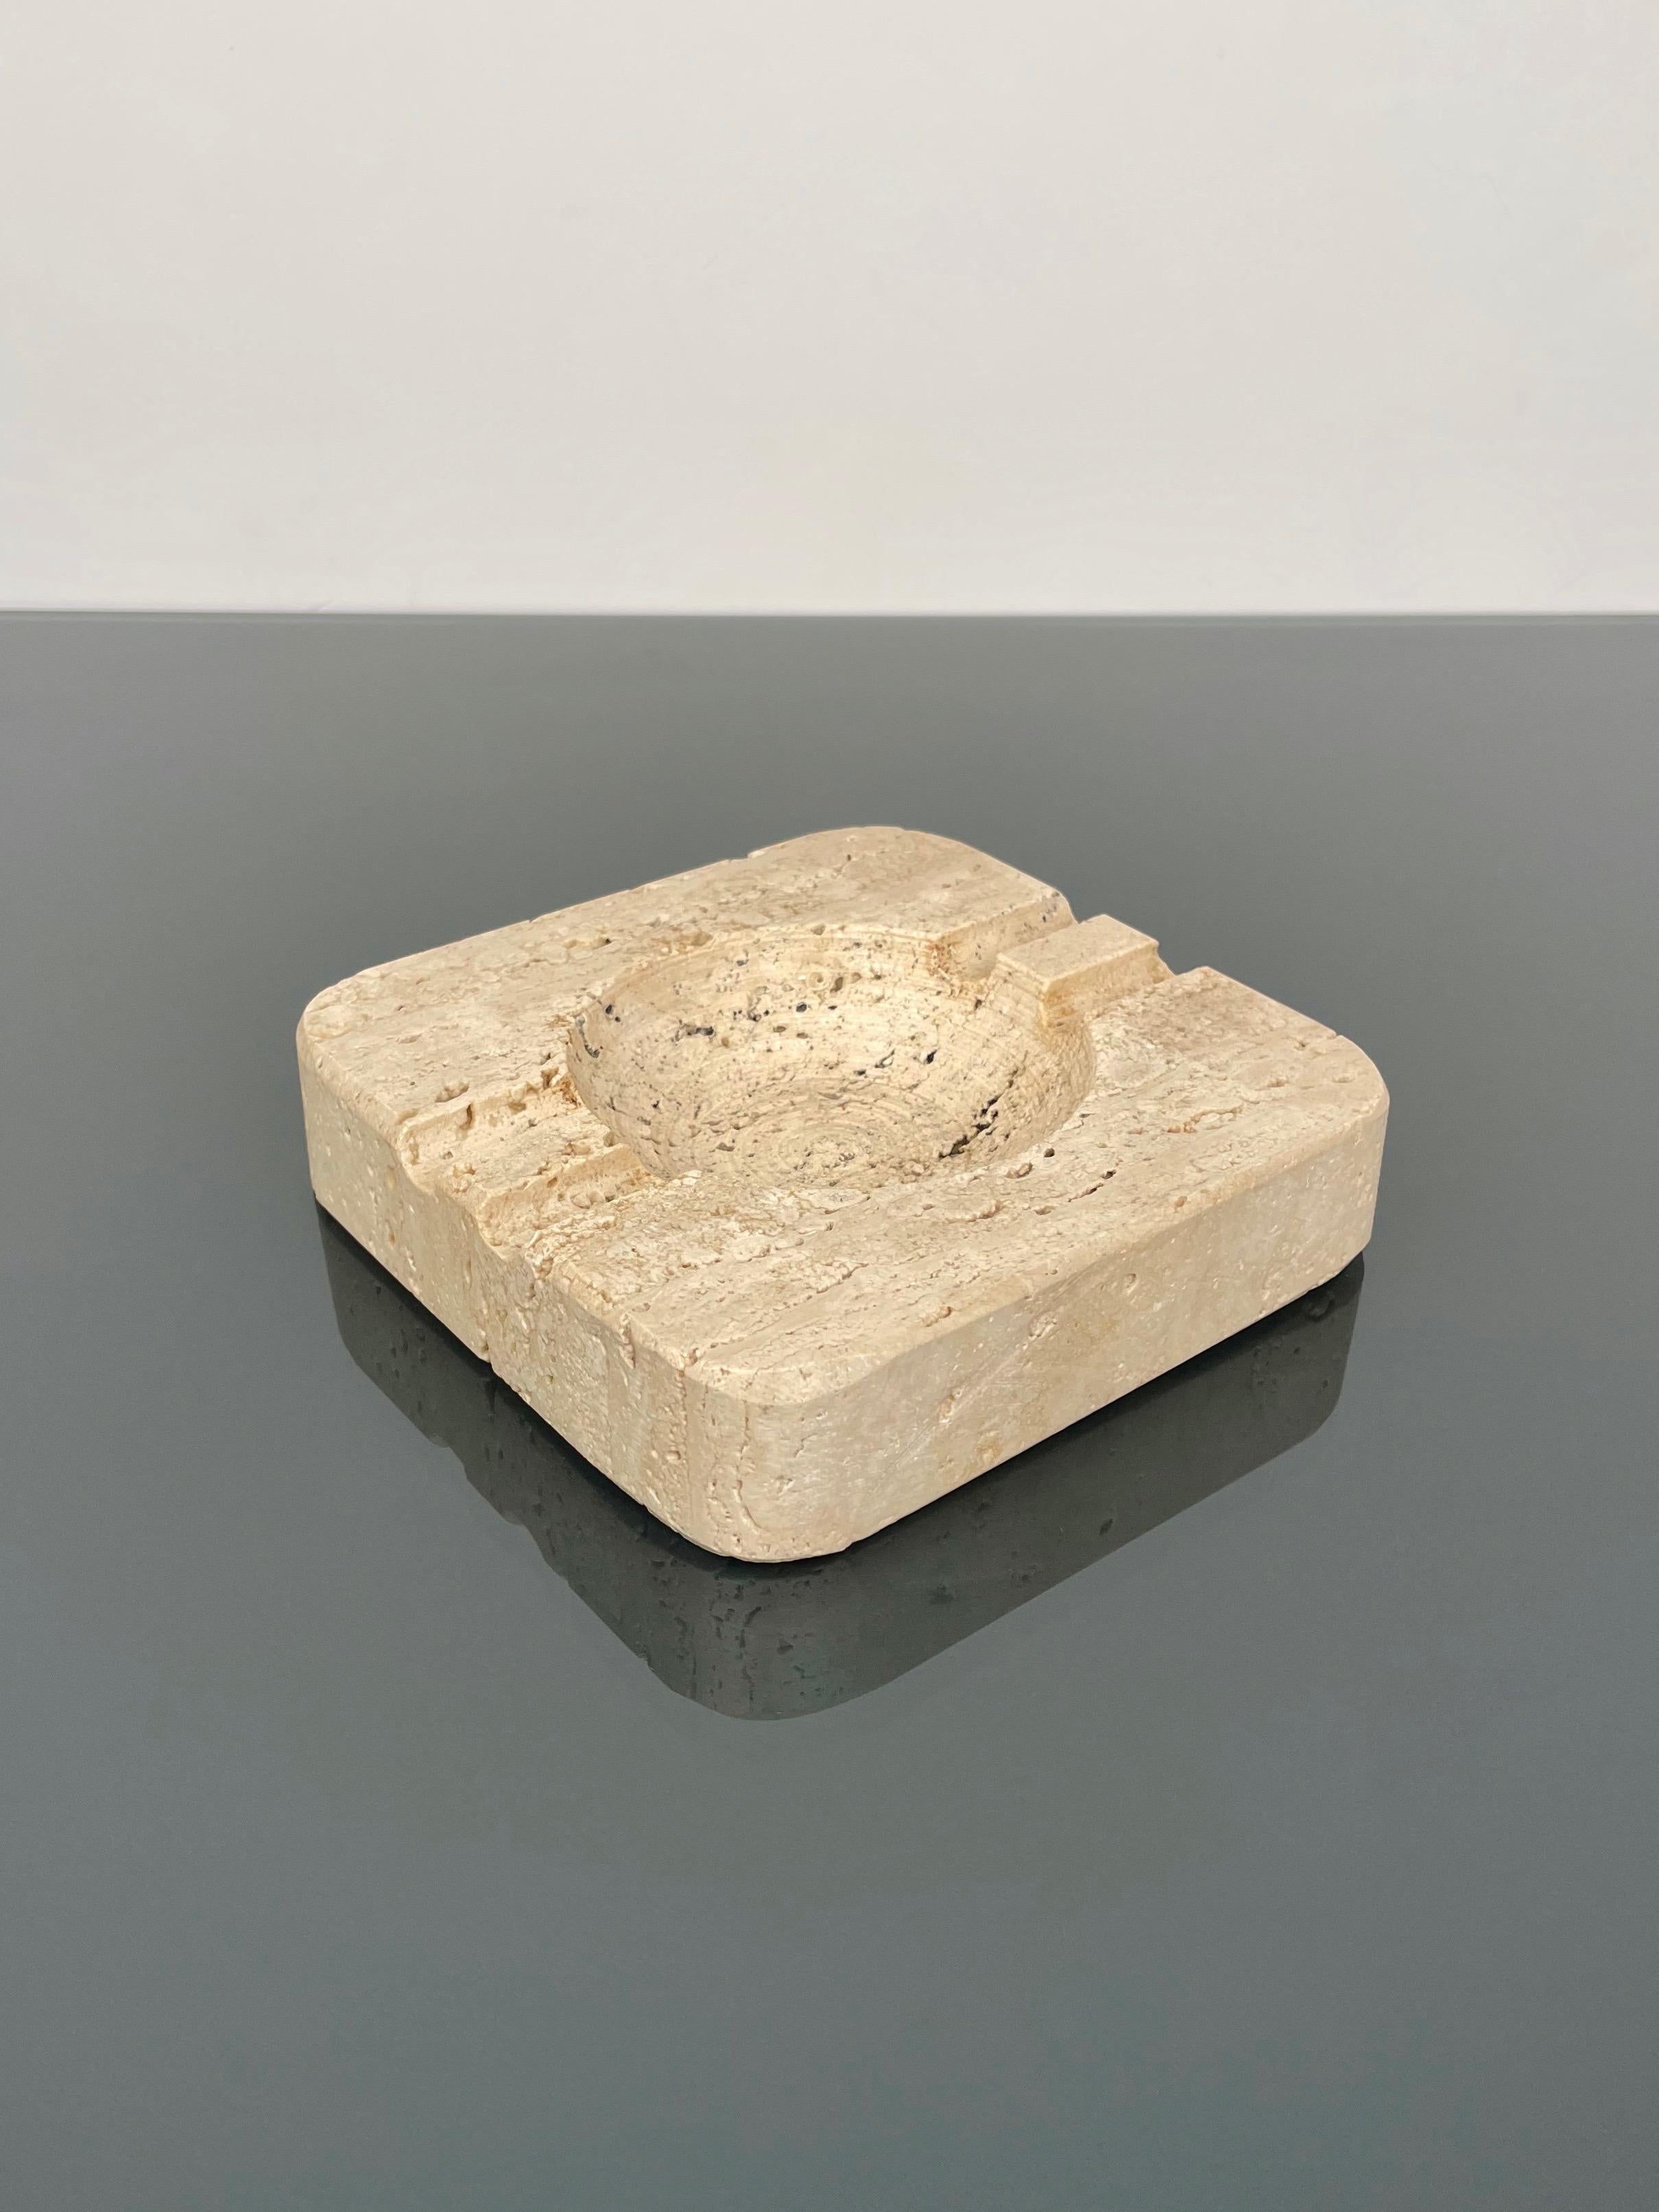 Squared ashtray in travertine marble attributed to Fratelli Mannelli. 

Made in Italy in the 1970s.